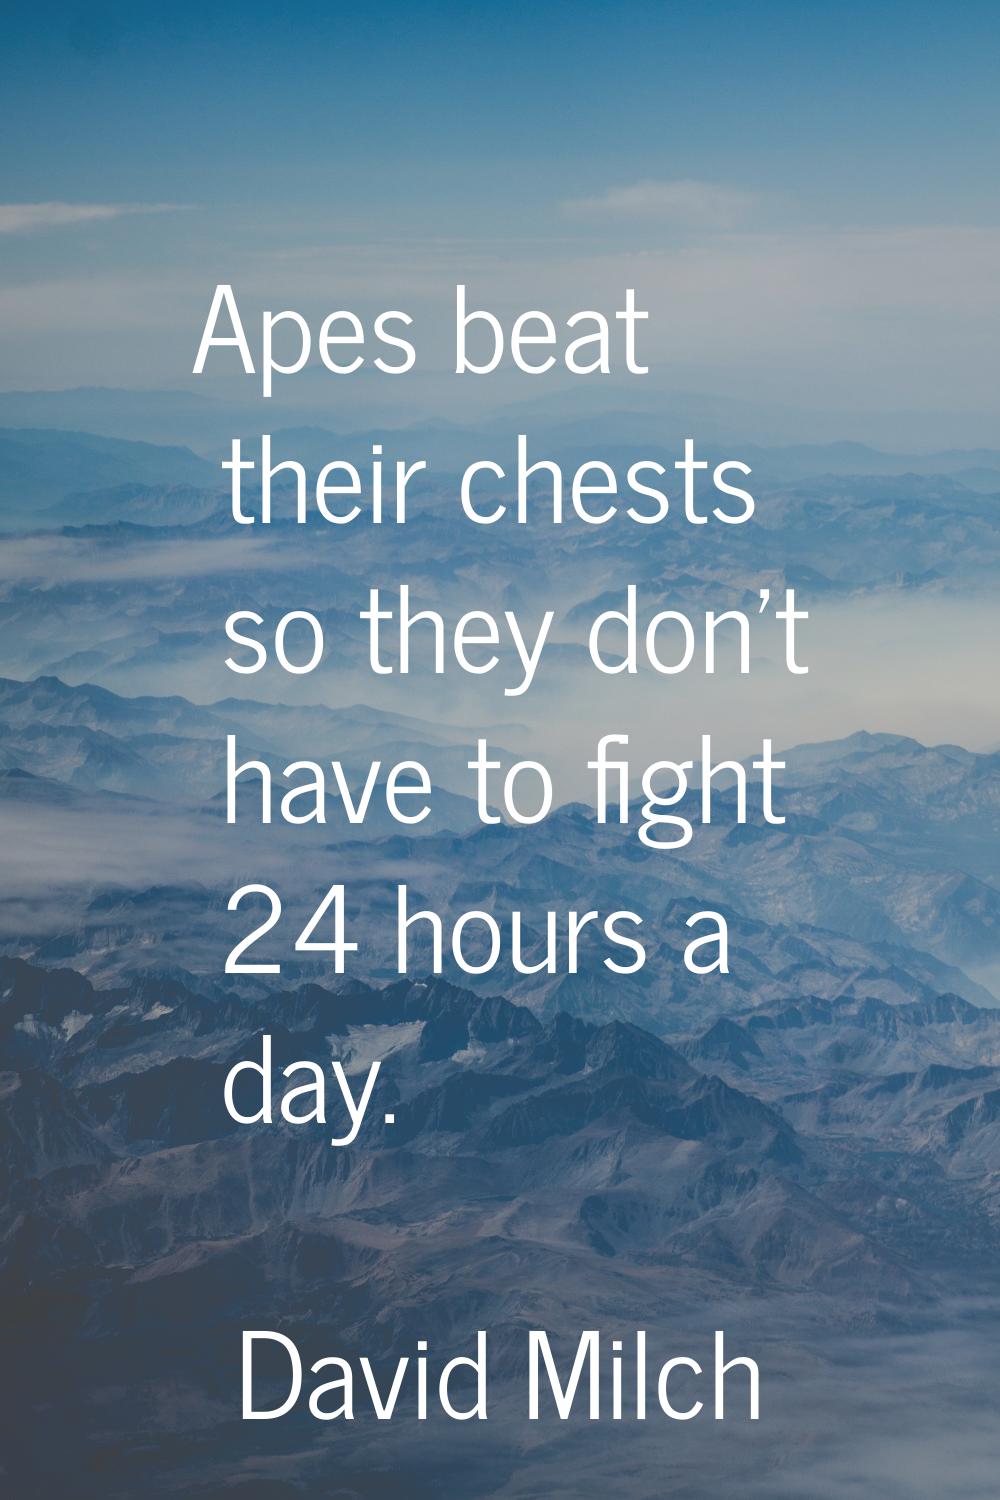 Apes beat their chests so they don't have to fight 24 hours a day.